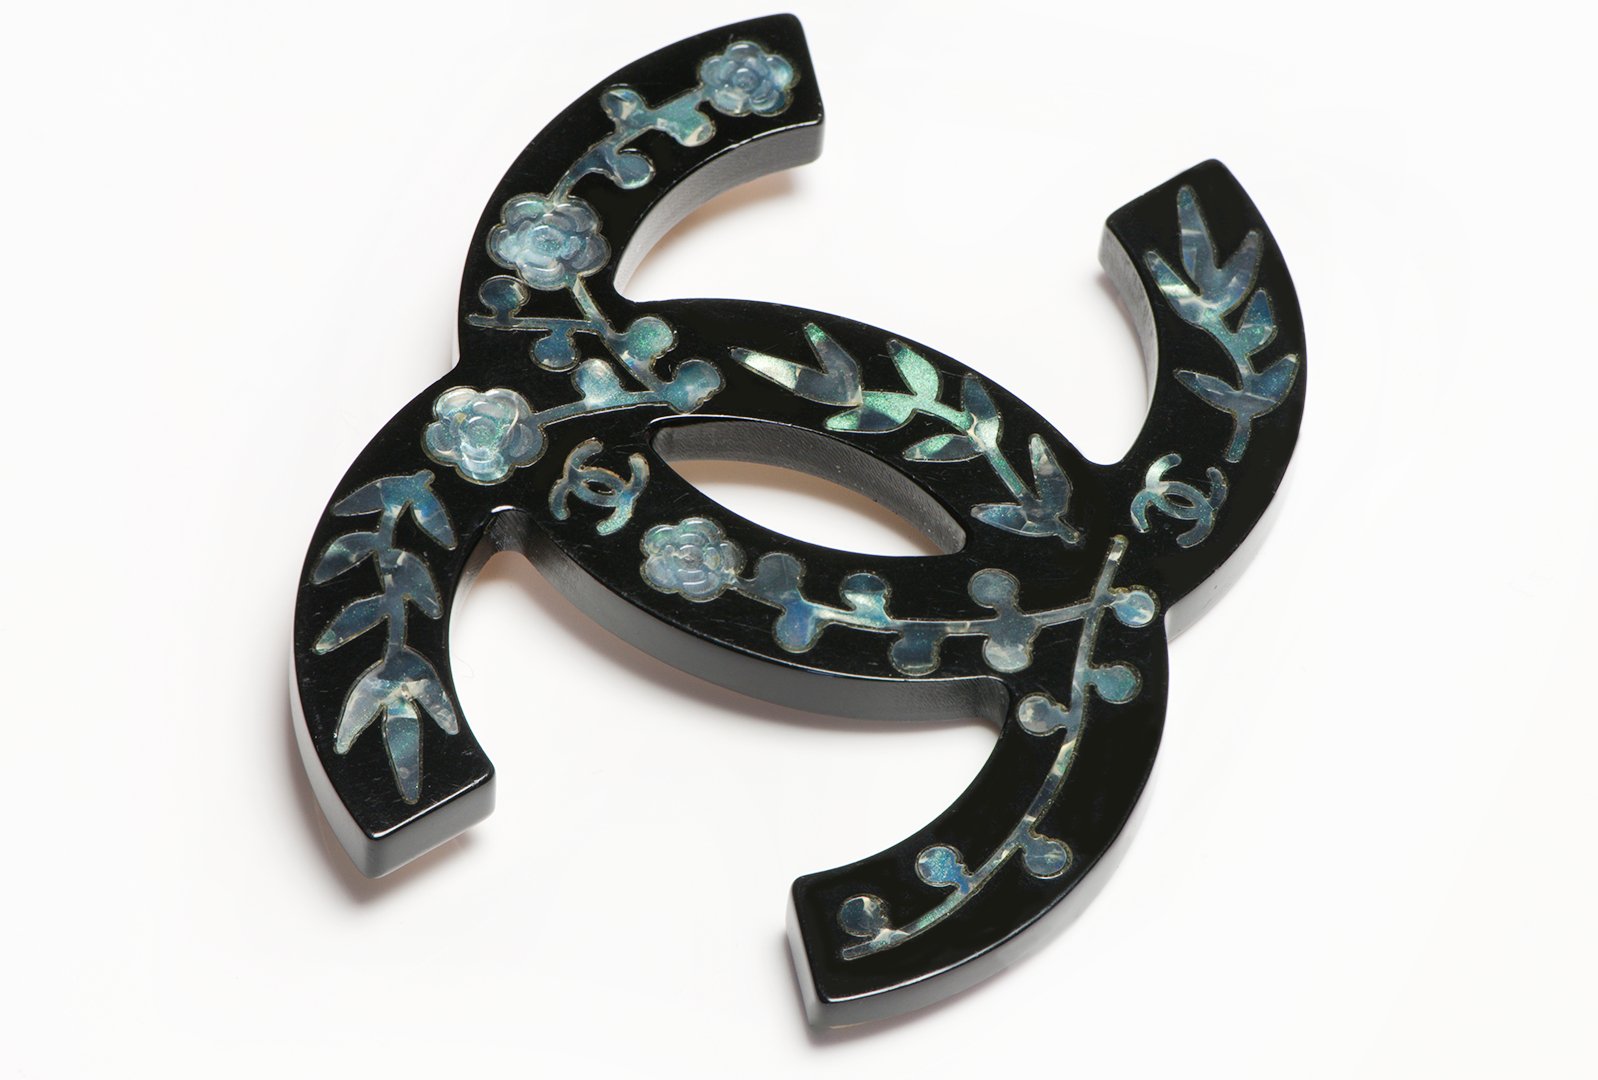 Chanel Paris Fall 2010 CC Black Resin Inlaid Mother of Pearl Camellia Brooch - DSF Antique Jewelry